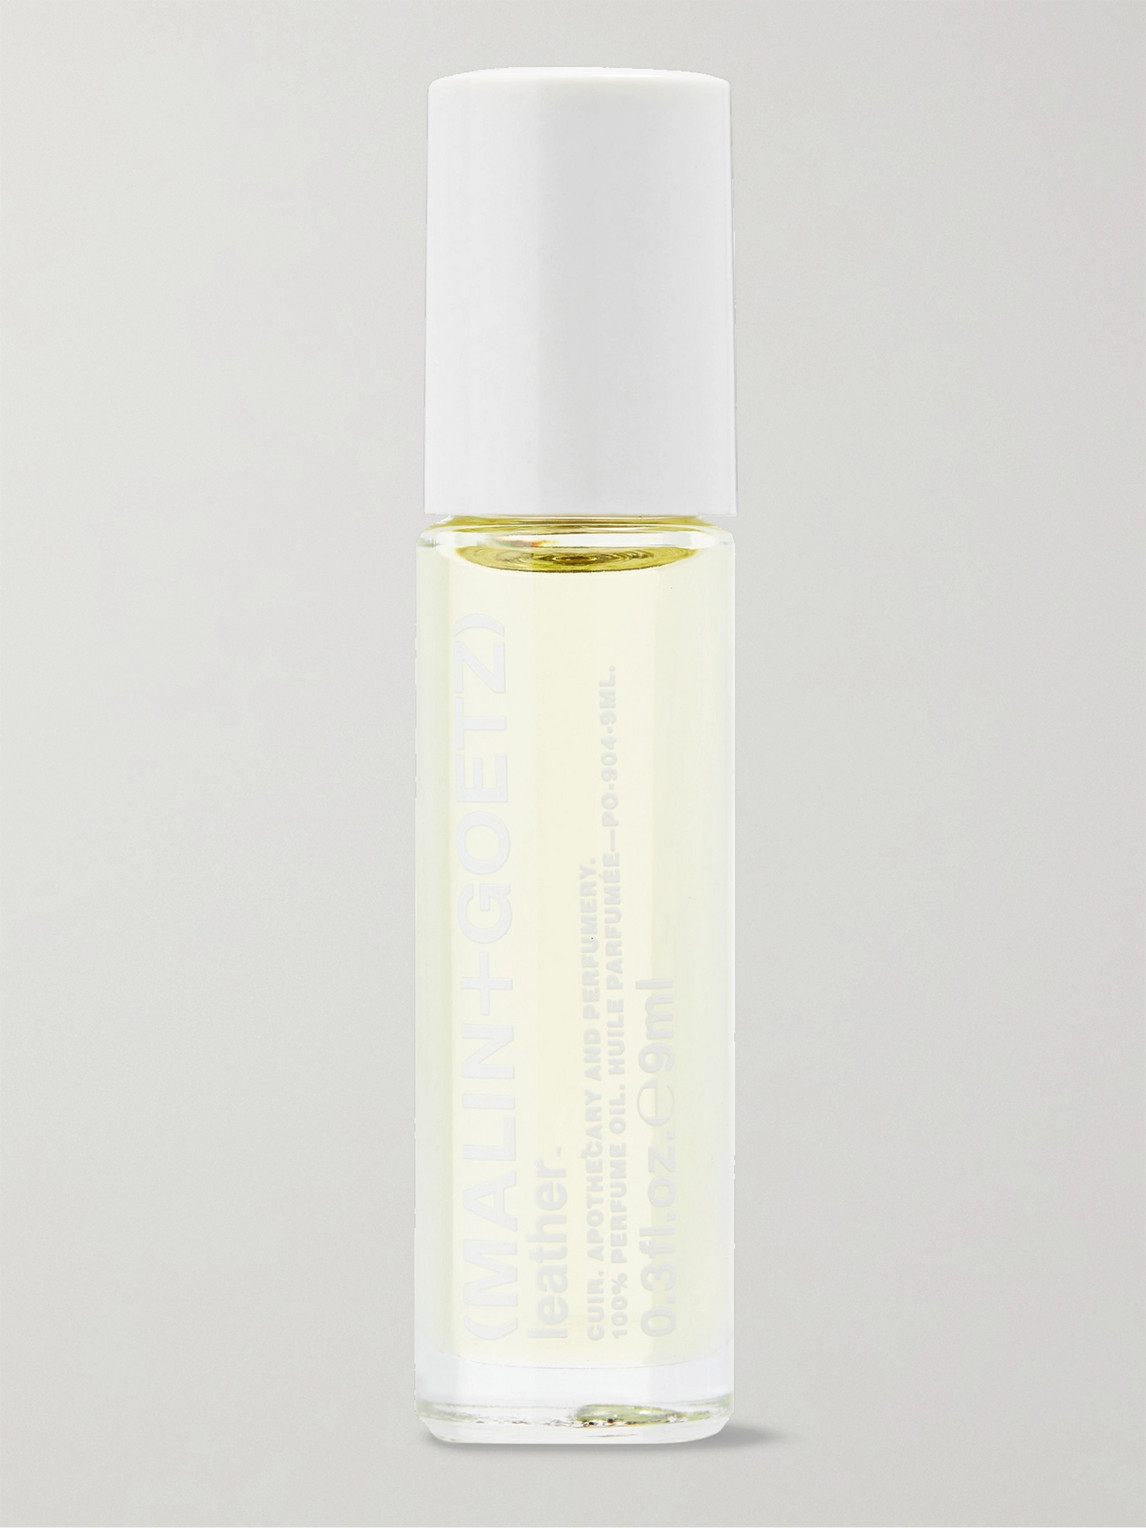 Malin + Goetz Leather Roll-on Perfume Oil, 9ml In Colorless